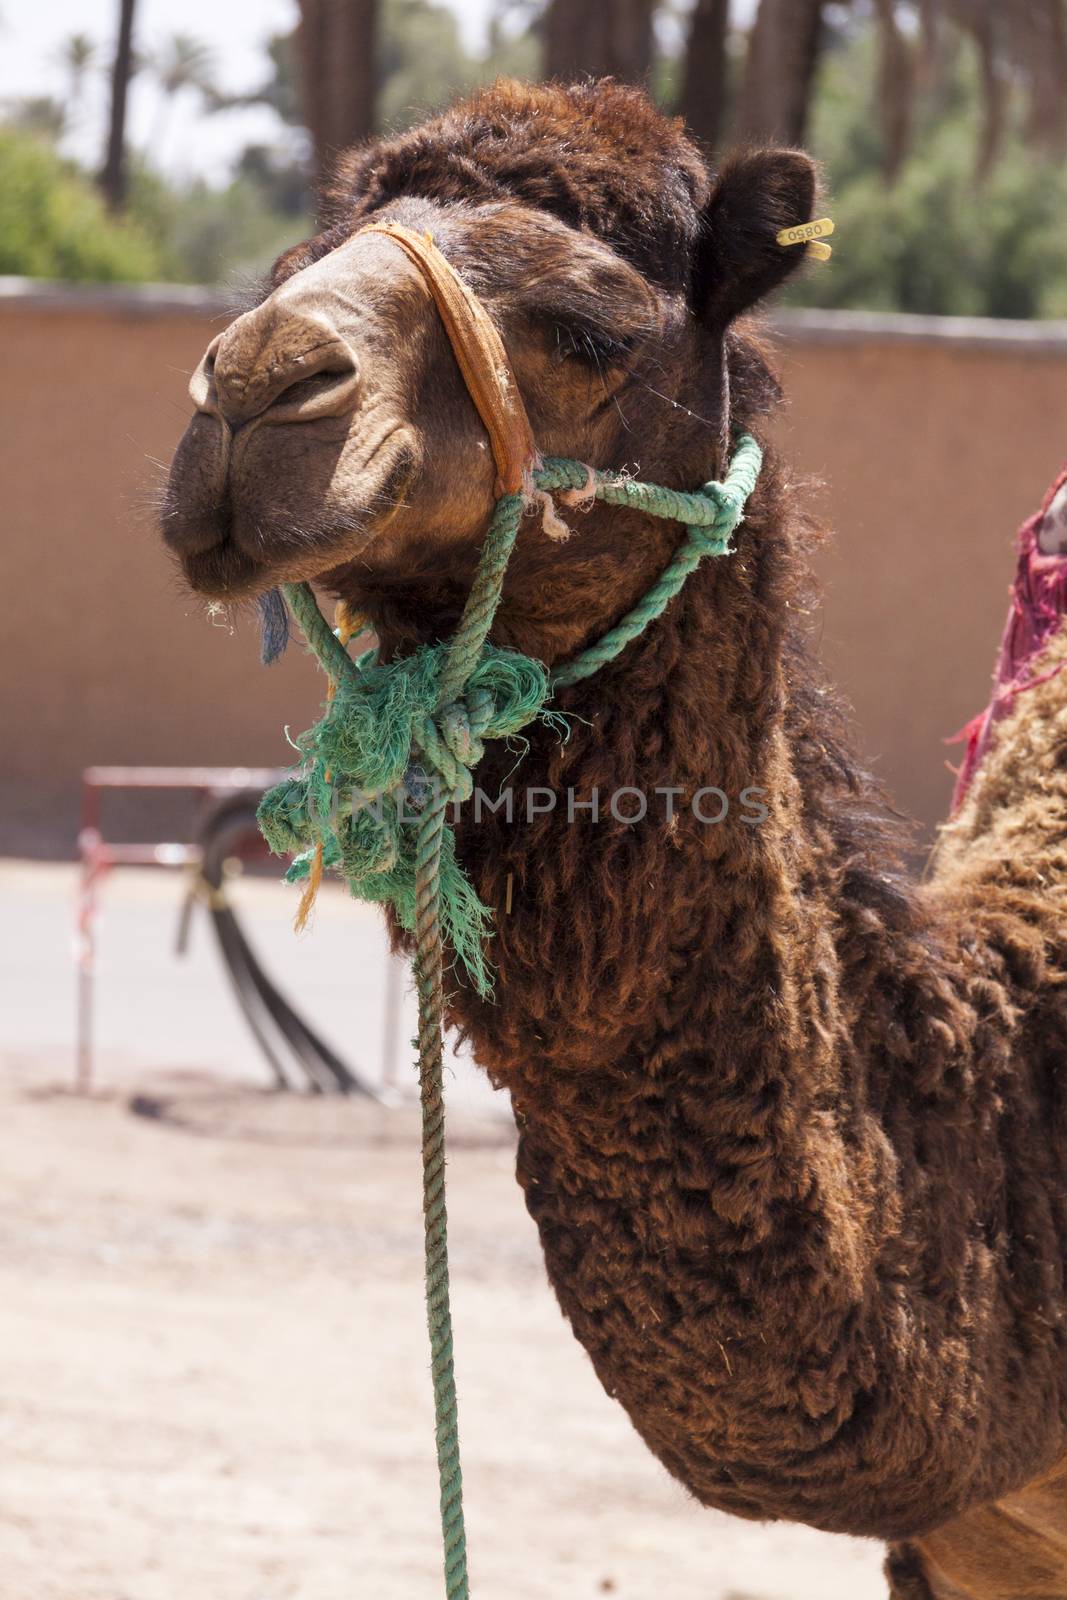 Camel in Marrakesch, Morocco wearing a harnes and saddle for transportation and use as a pack animal to carry loads